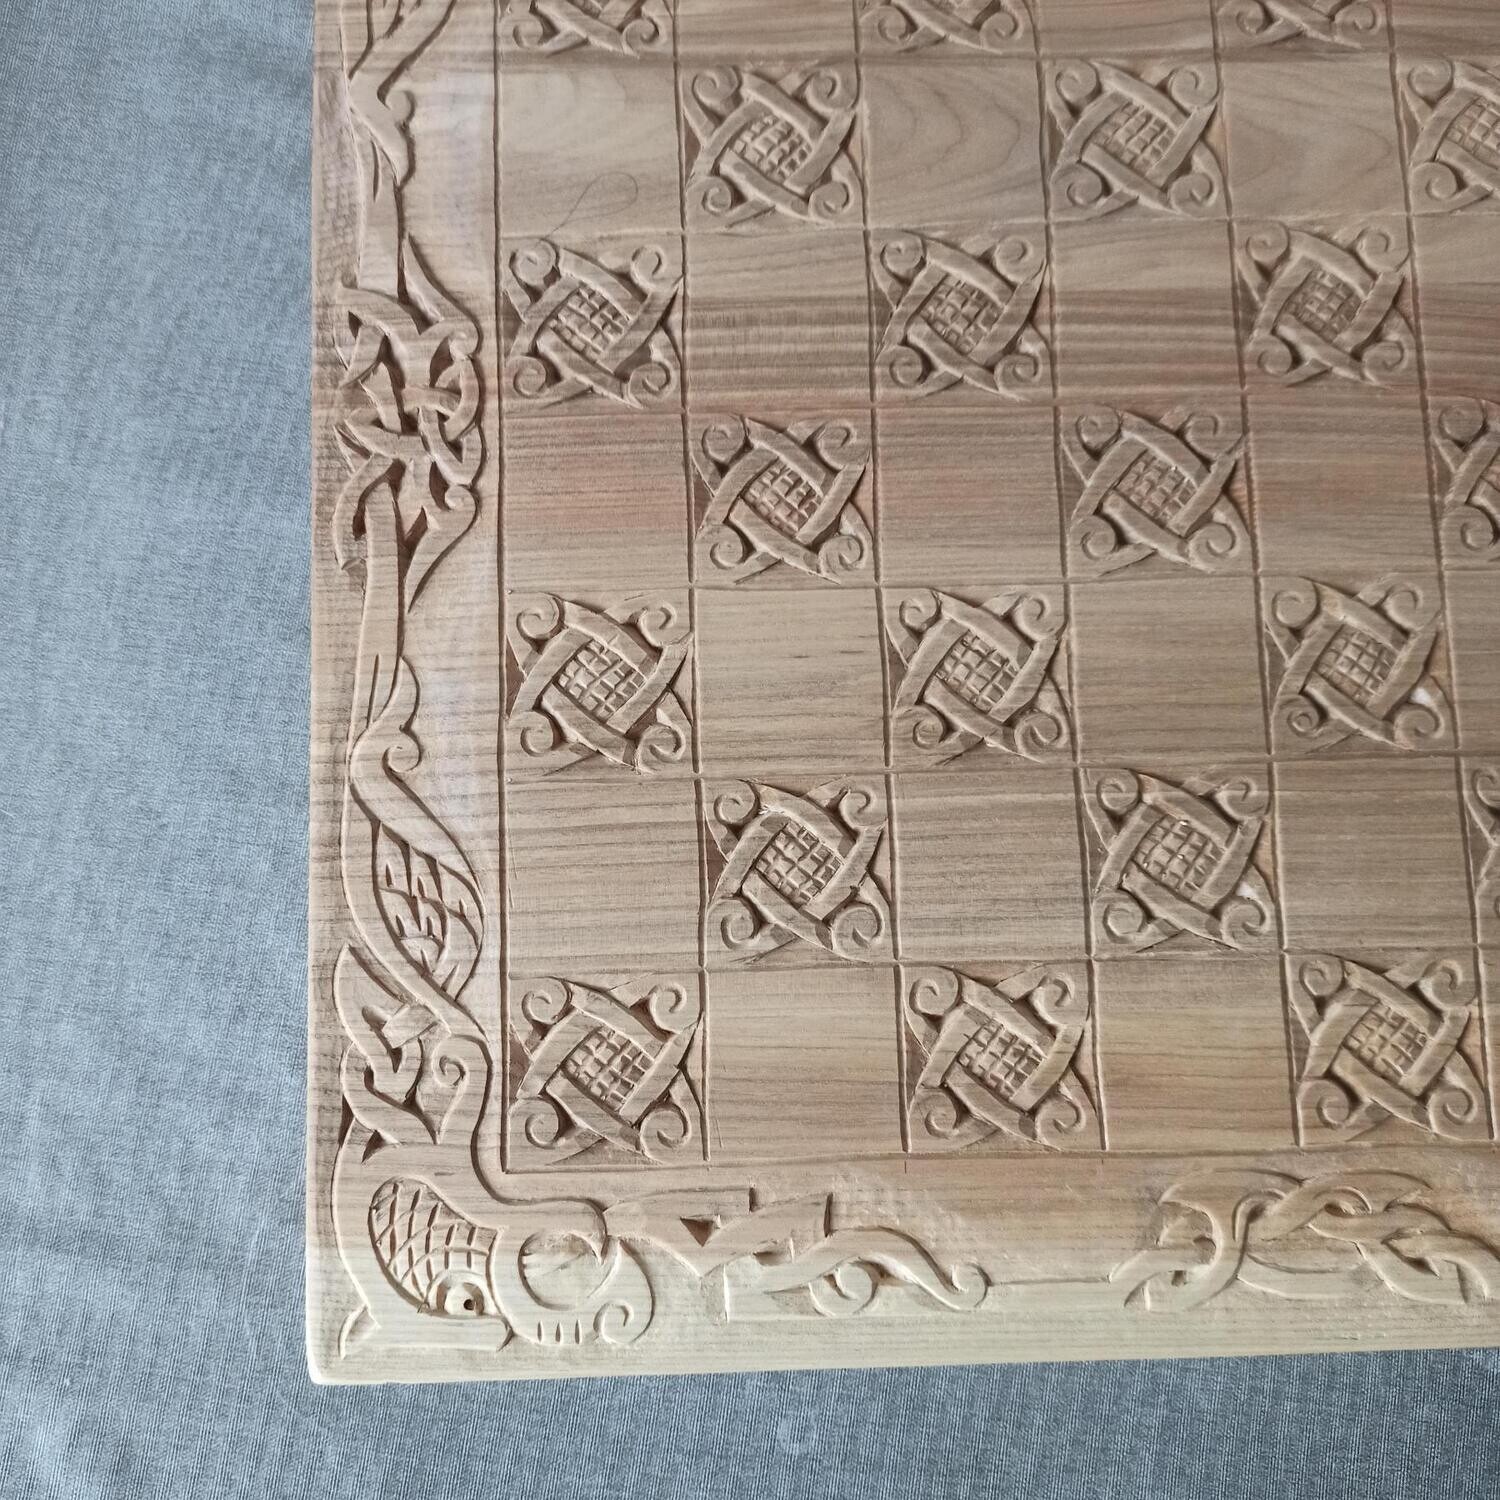 Lewis Chessmen Board, Solid Ash Tree, Hand-carved and Unique